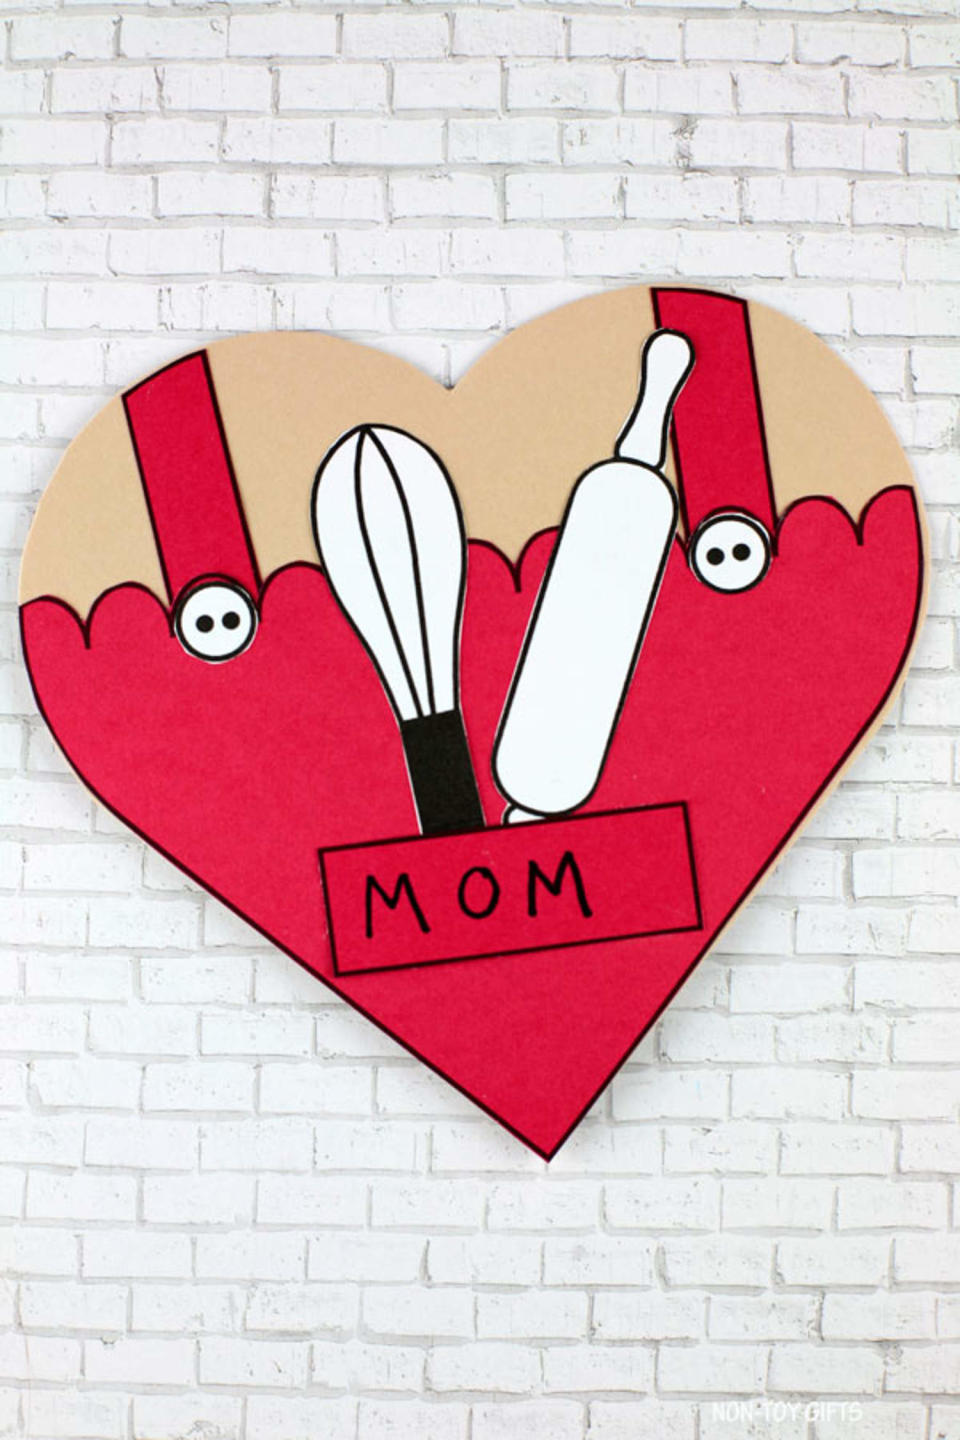 baking mother's day card  (Non-Toy Gifts)